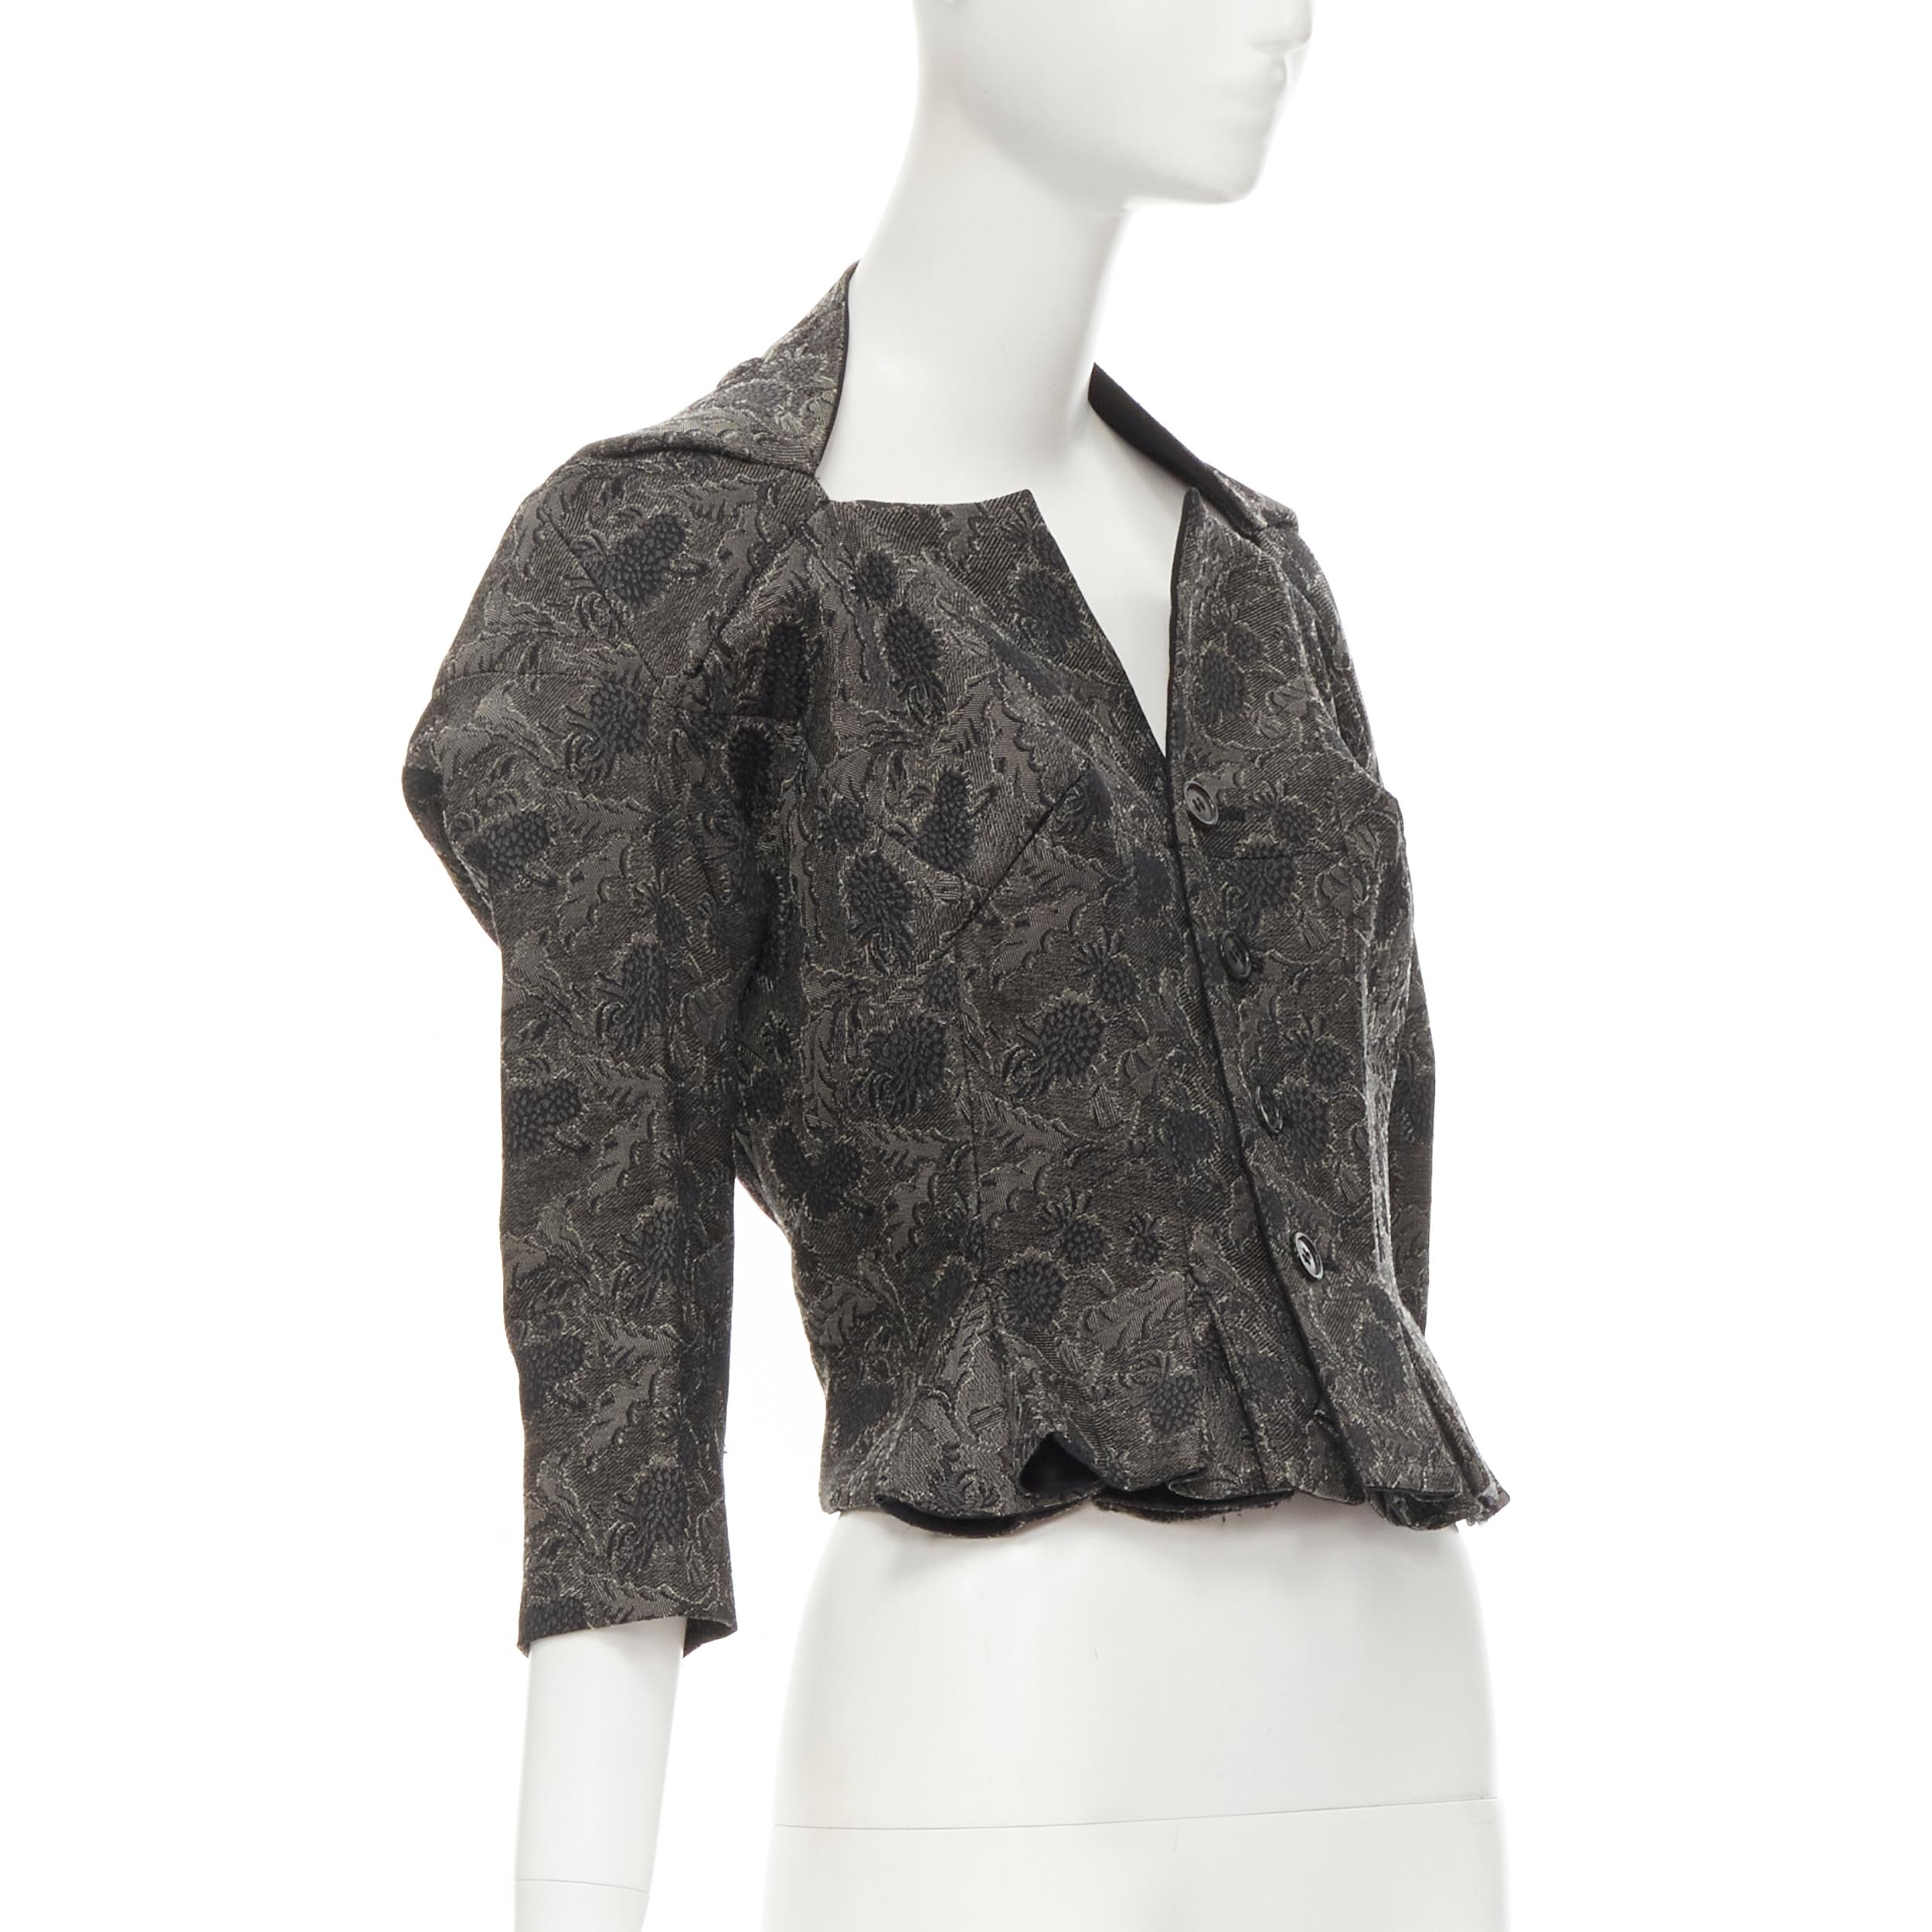 rare JUNYA WATANABE 1999 grey floral lace jacquard transformable jacket M
Reference: CRTI/A00748
Brand: Junya Watanabe
Designer: Junya Watanabe
Collection: 1999 - Similar design on the Runway
Material: Wool, Polyester
Color: Grey
Pattern: